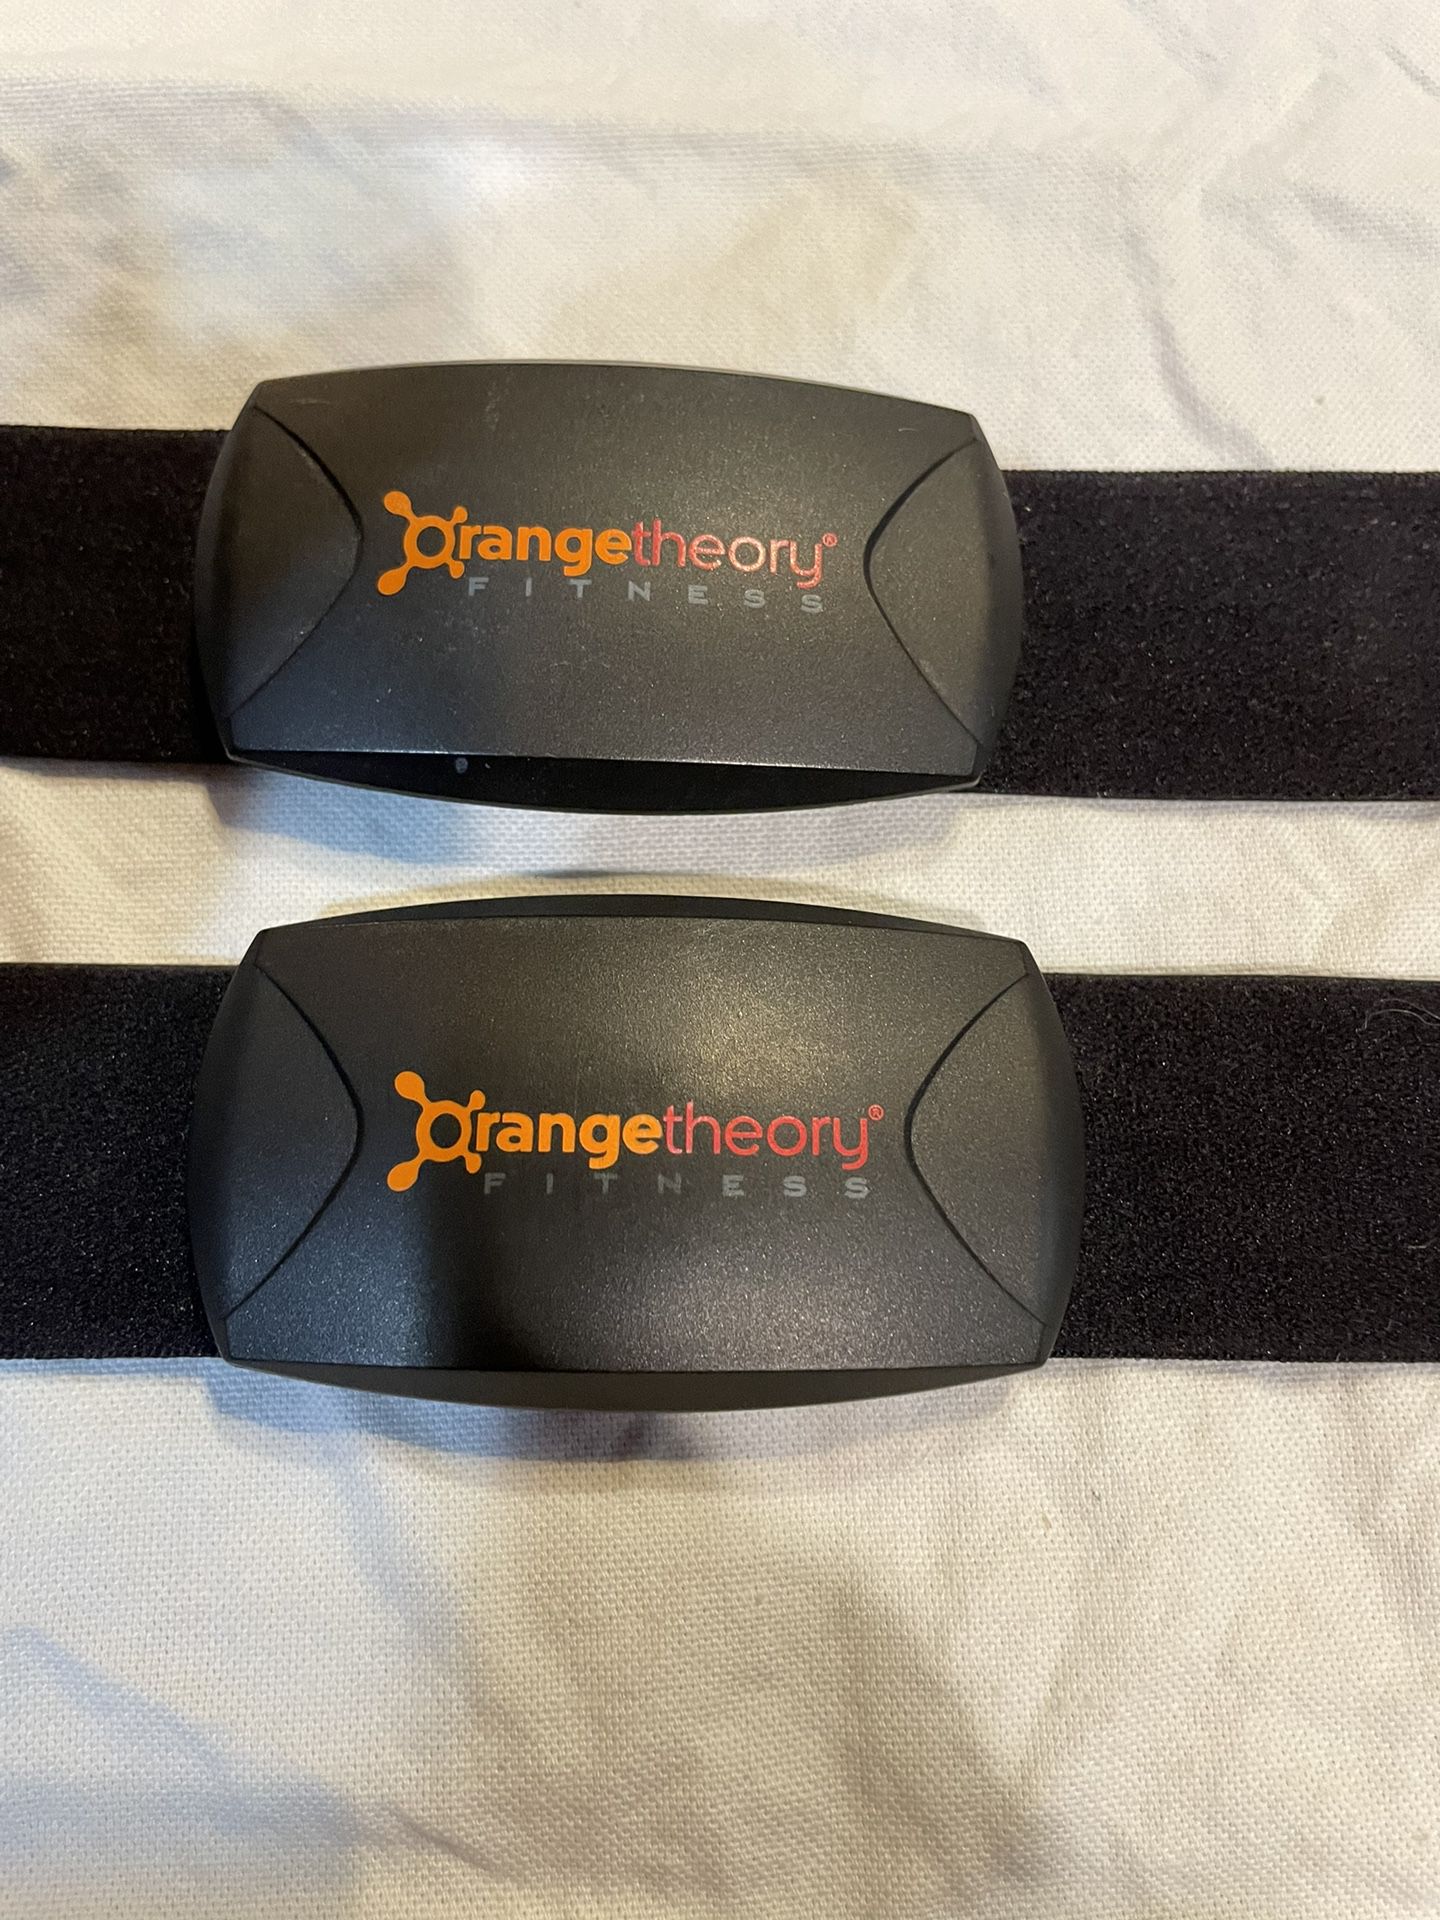 ONE Orange Theory Chest Monitor for Sale in Vancouver, WA - OfferUp